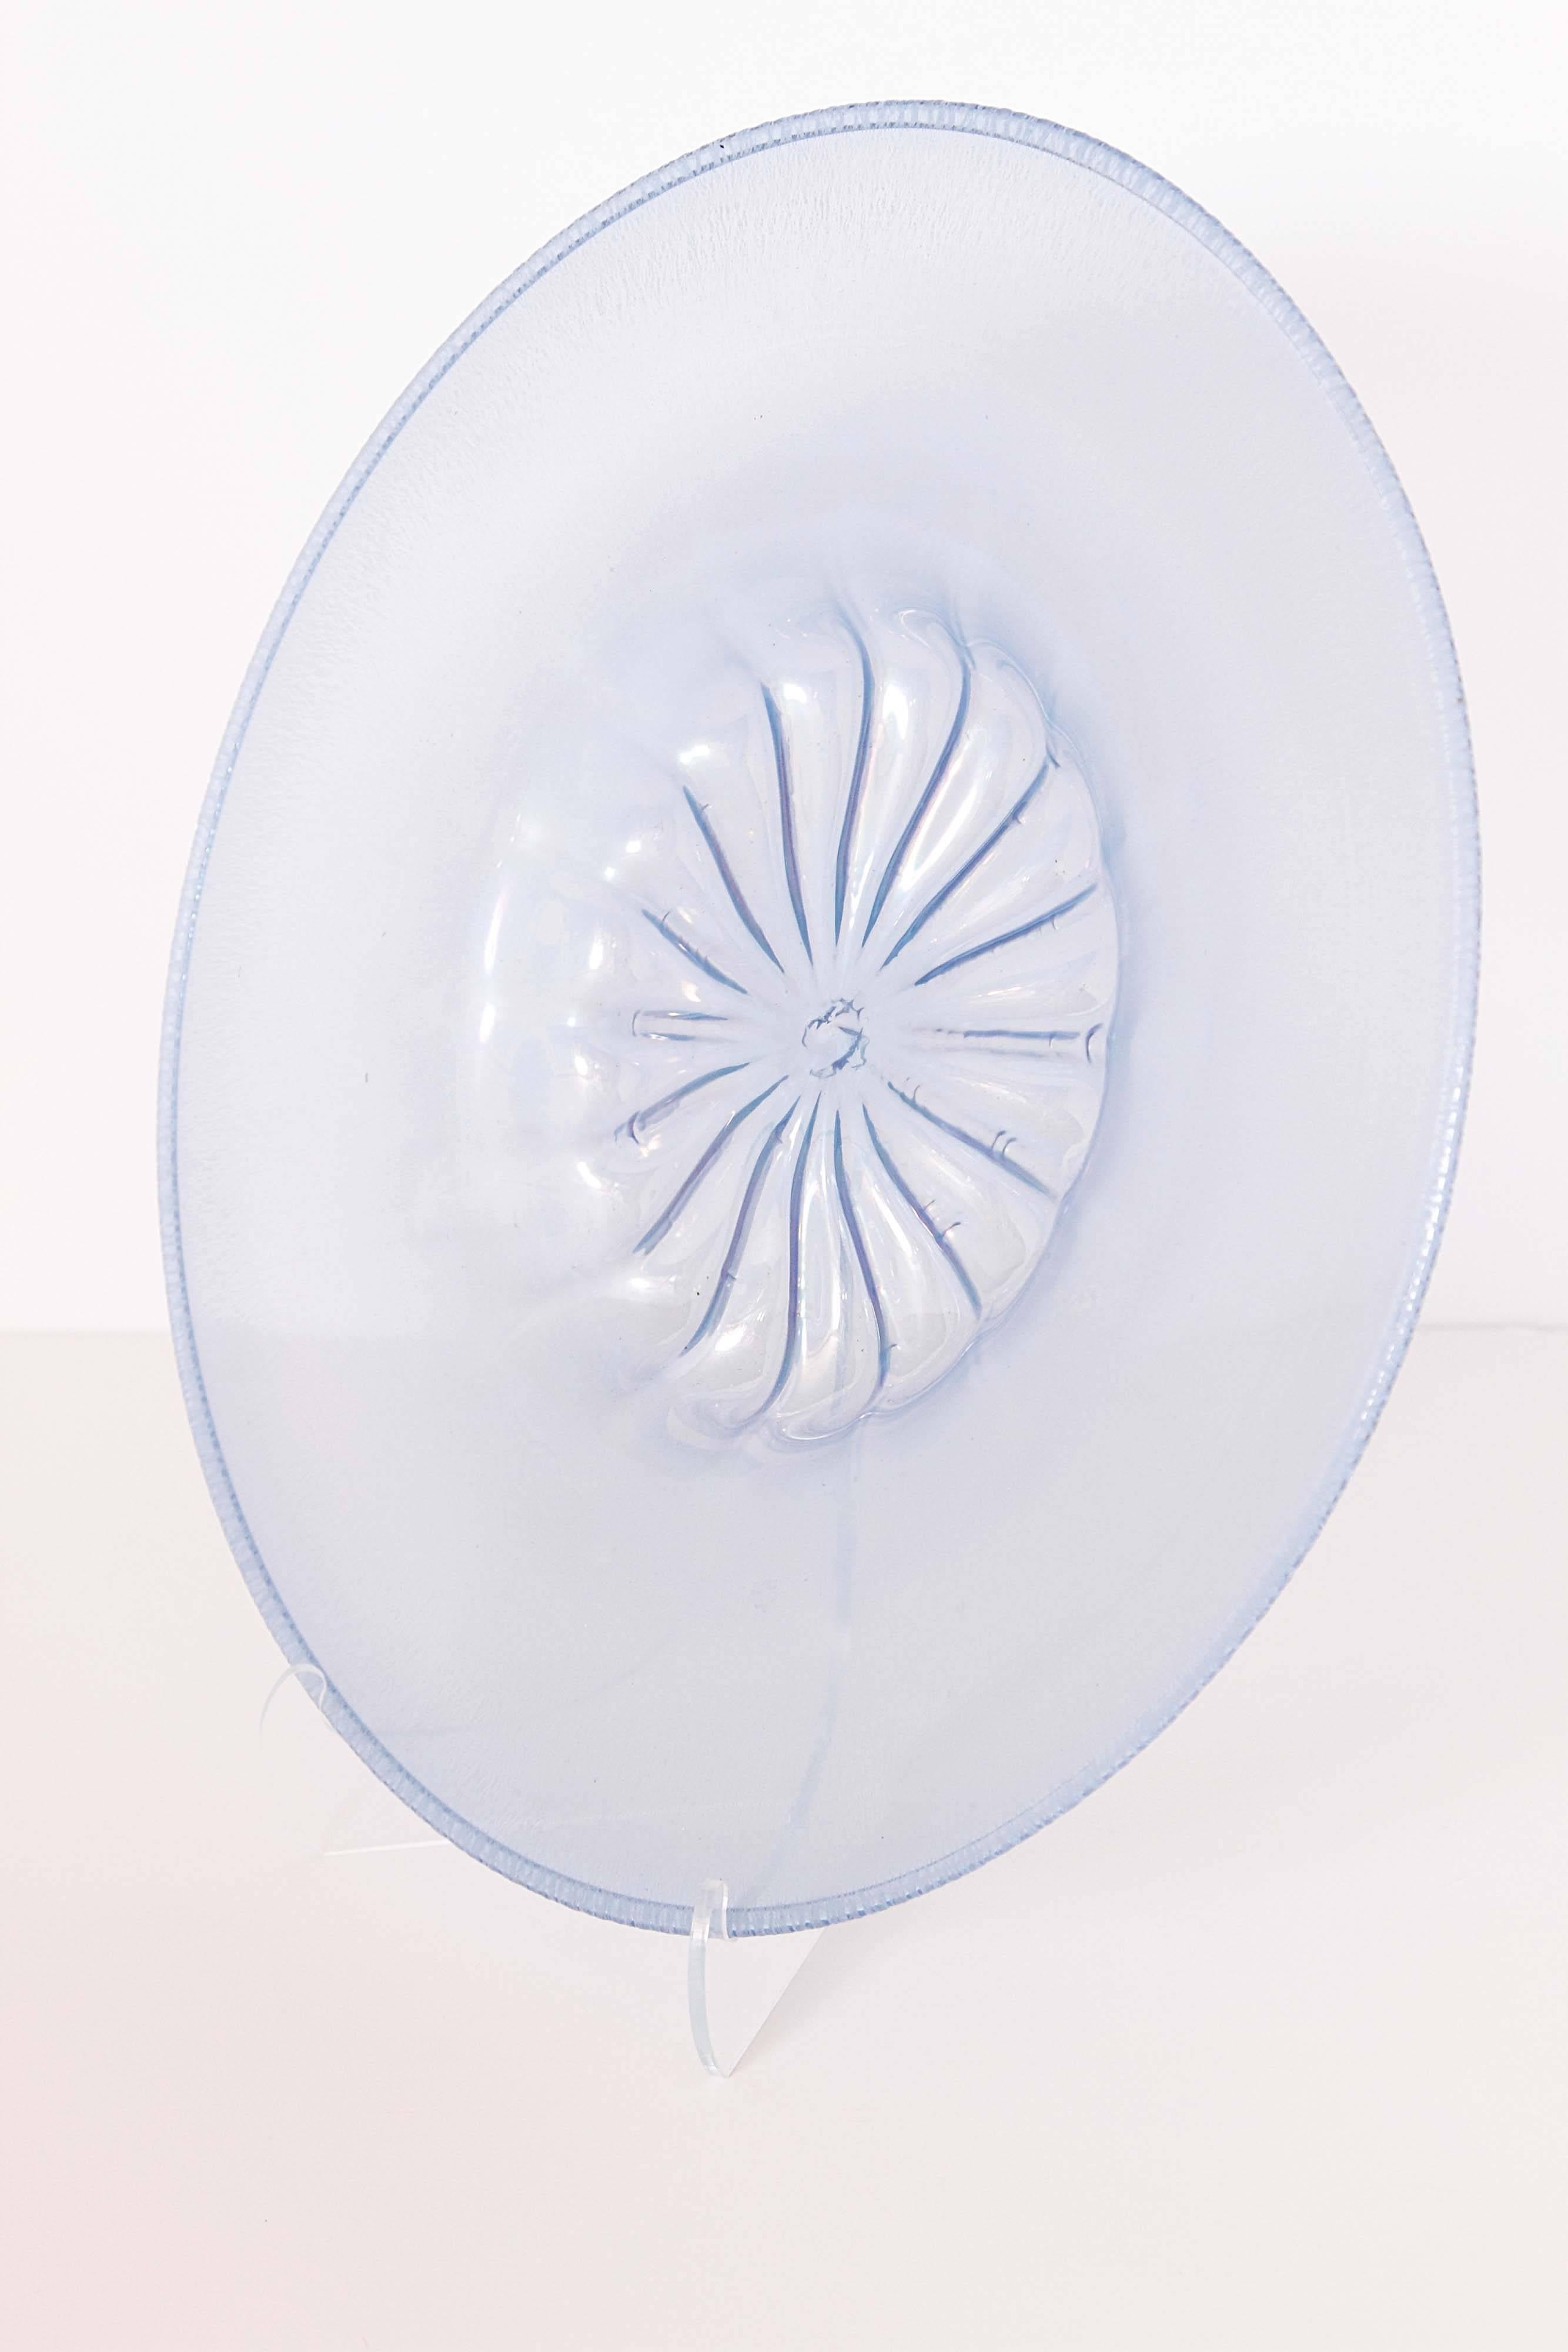 Large Venetian glass plate with intricate detail in the center, clear blue.